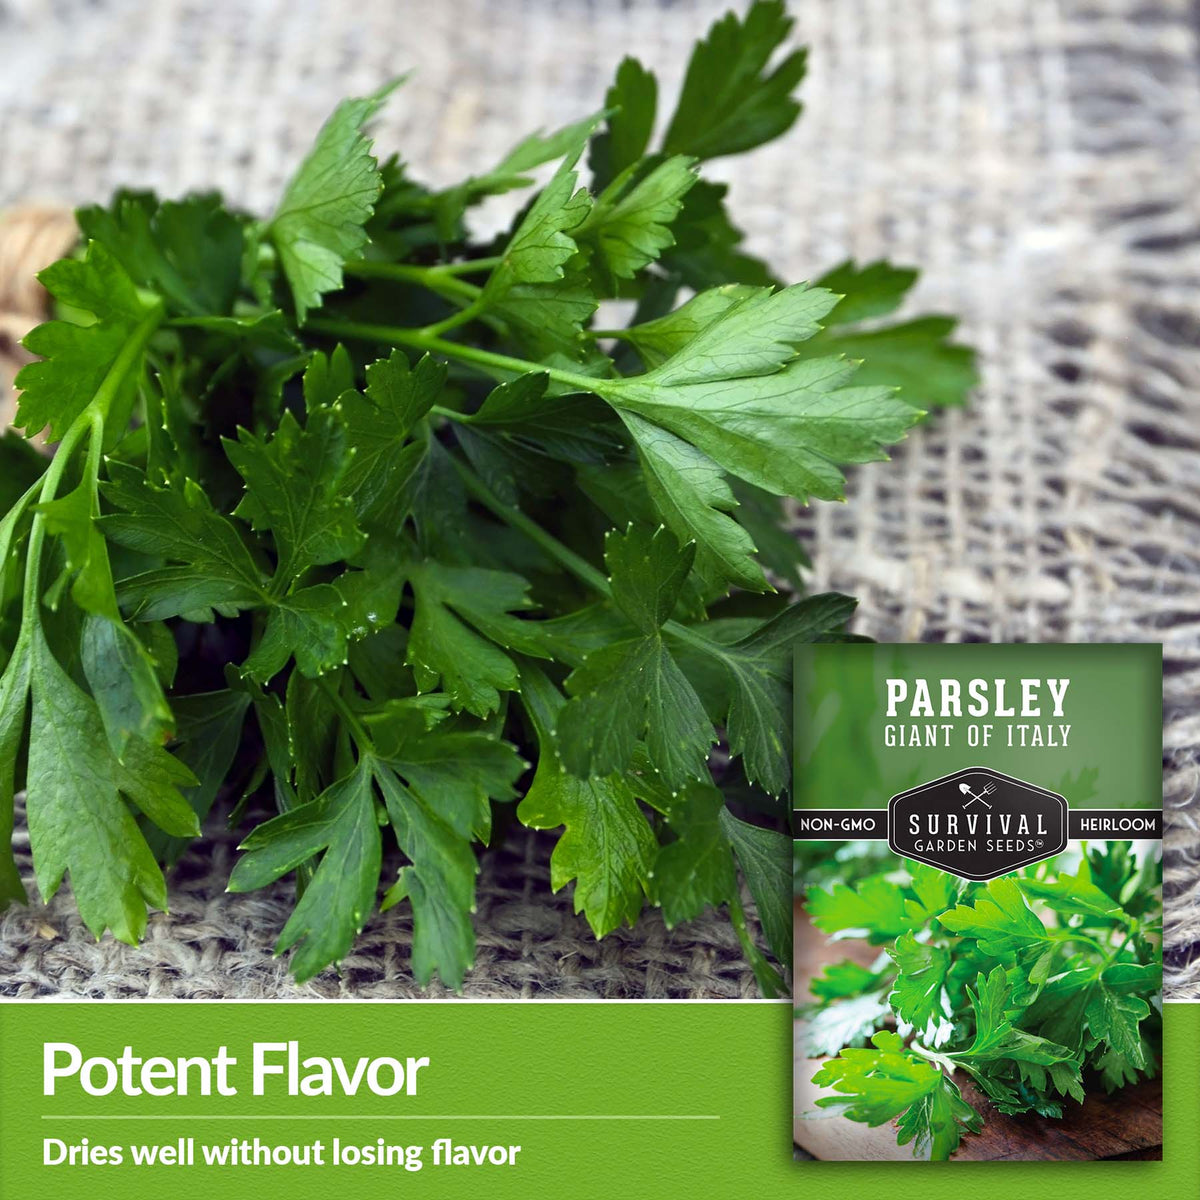 Italian giant parsley dries well without losing flavor